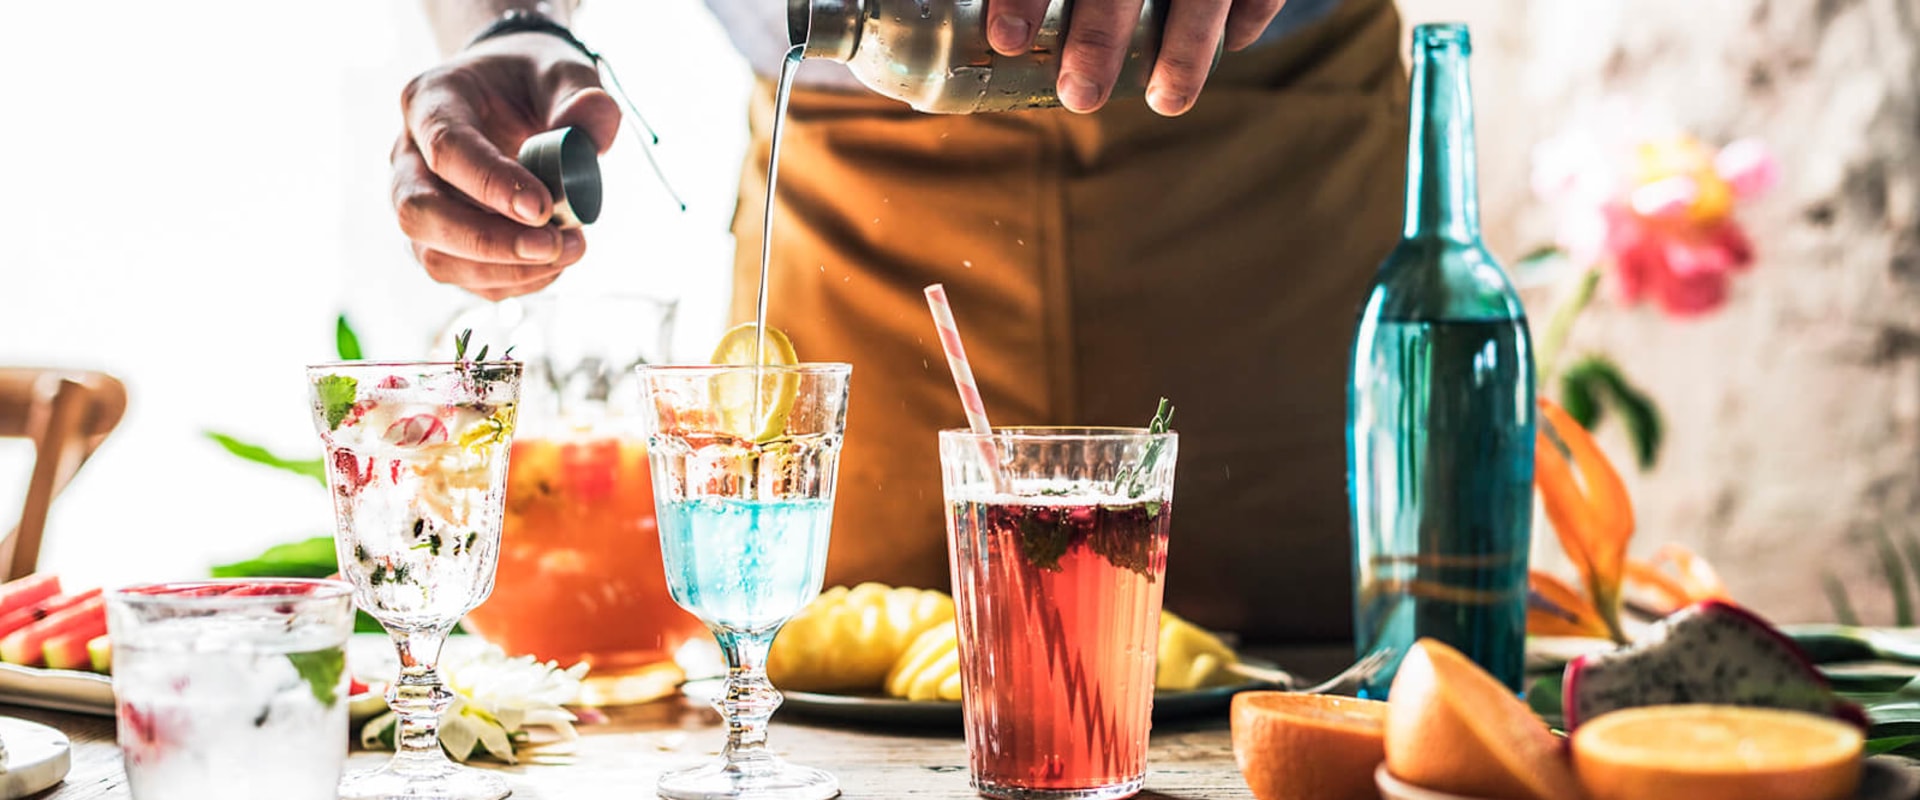 What Should a Beginner Bartender Know?